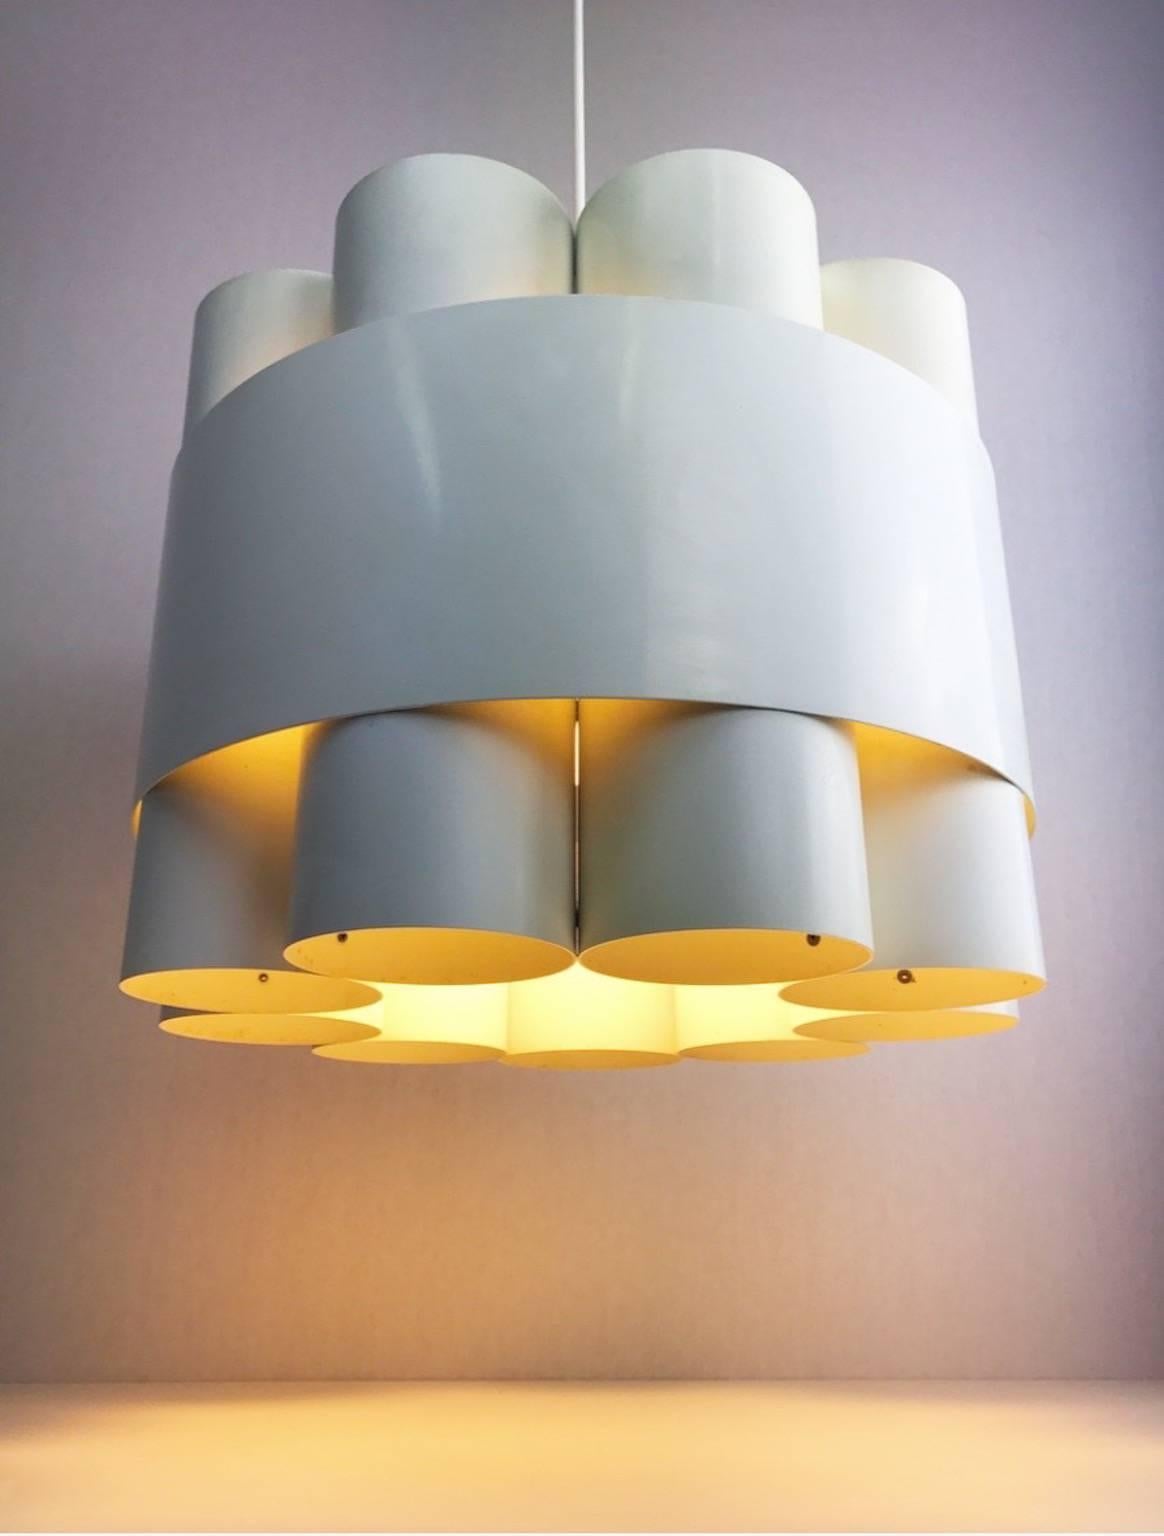 A very rare design piece from 1972 designed by Danish Jo Hammerborg for Fog & Mørup.

This contemporary and Minimalist chandelier combines functionality with aesthetics which makes this an unique eye-catcher. 

Nine white lacquered metal tubes